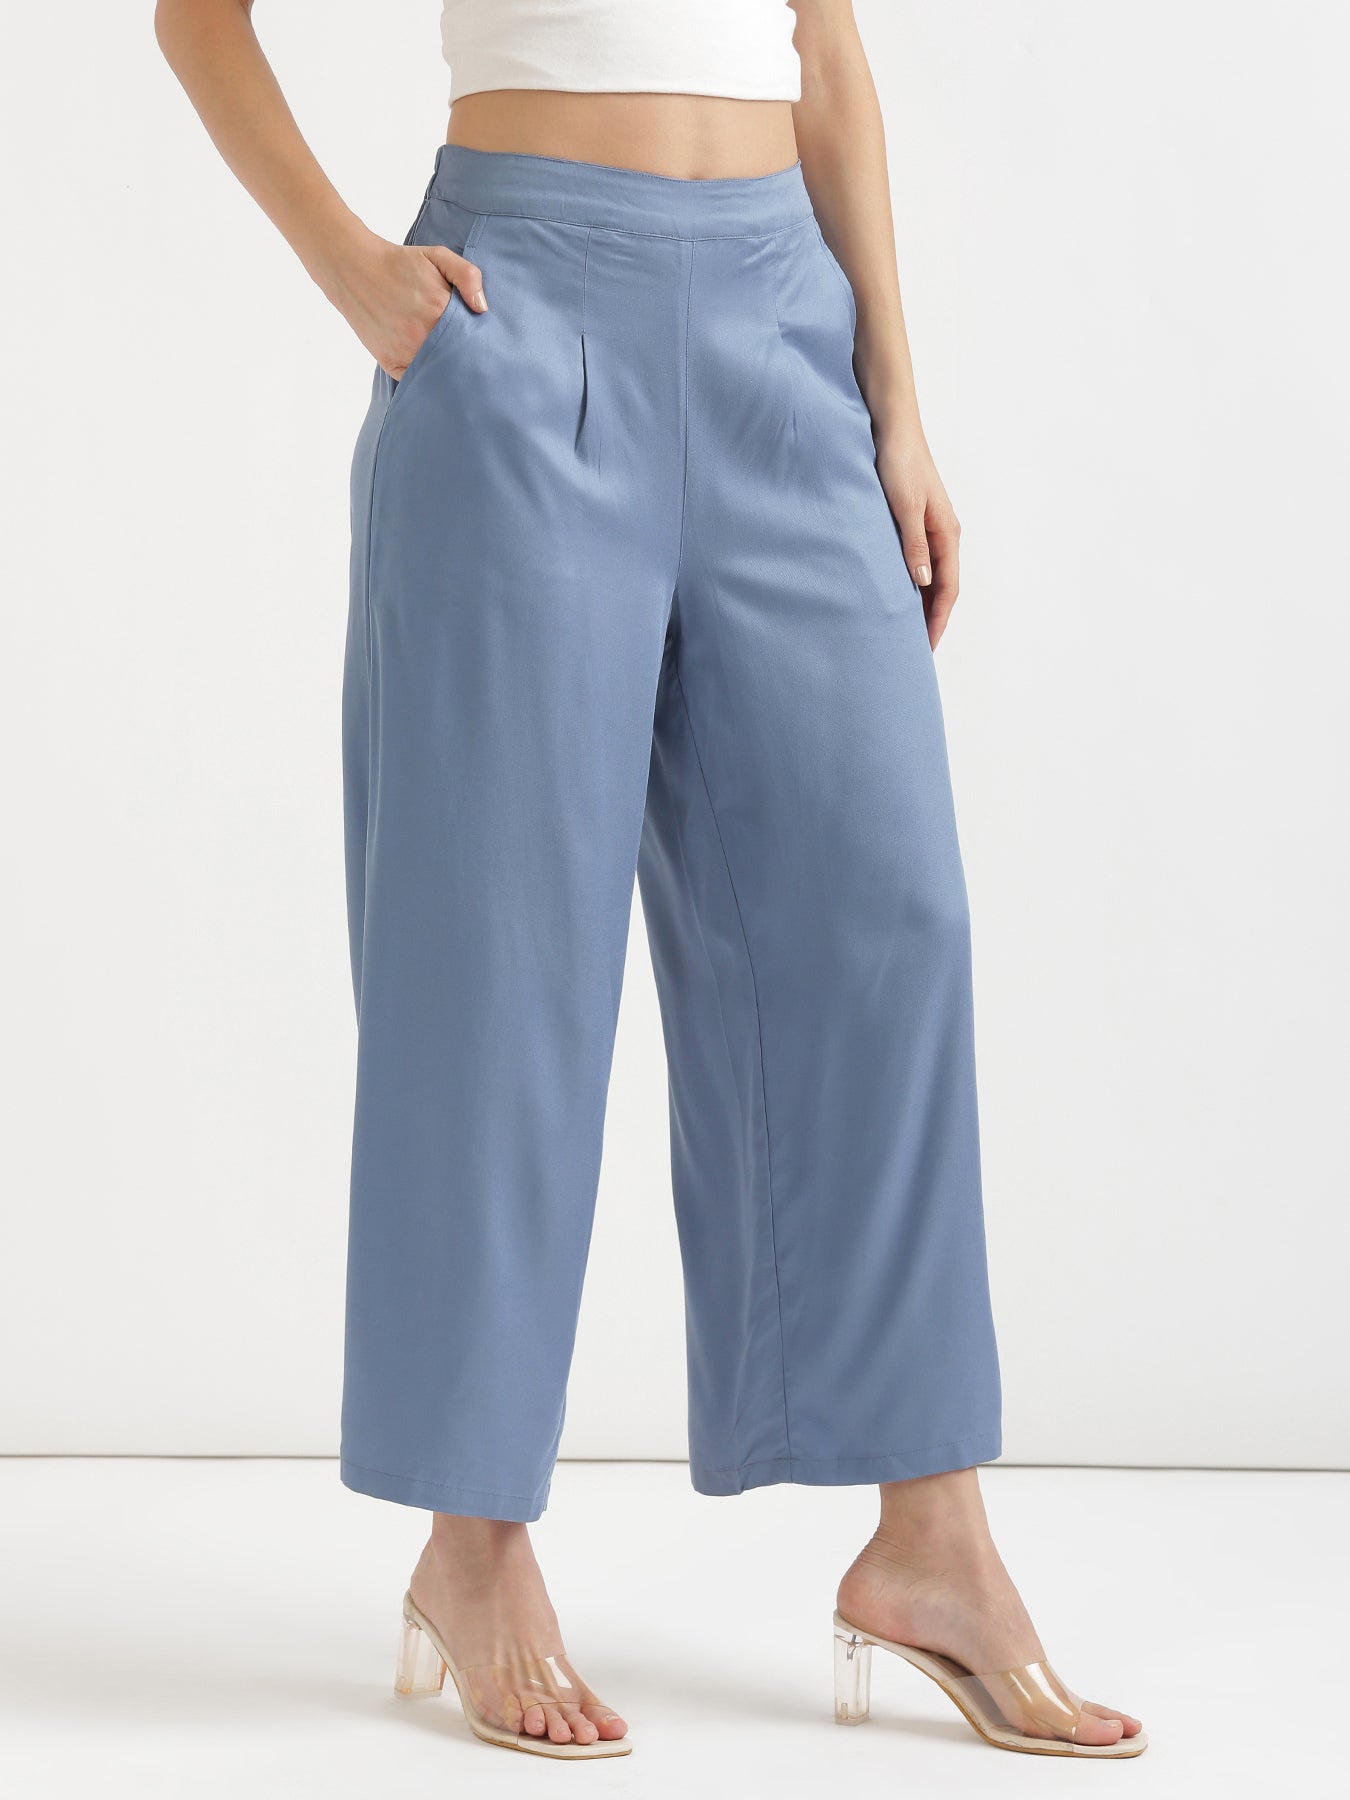 English Blue Palazzo Pants For Women | Shop online from सादा /SAADAA